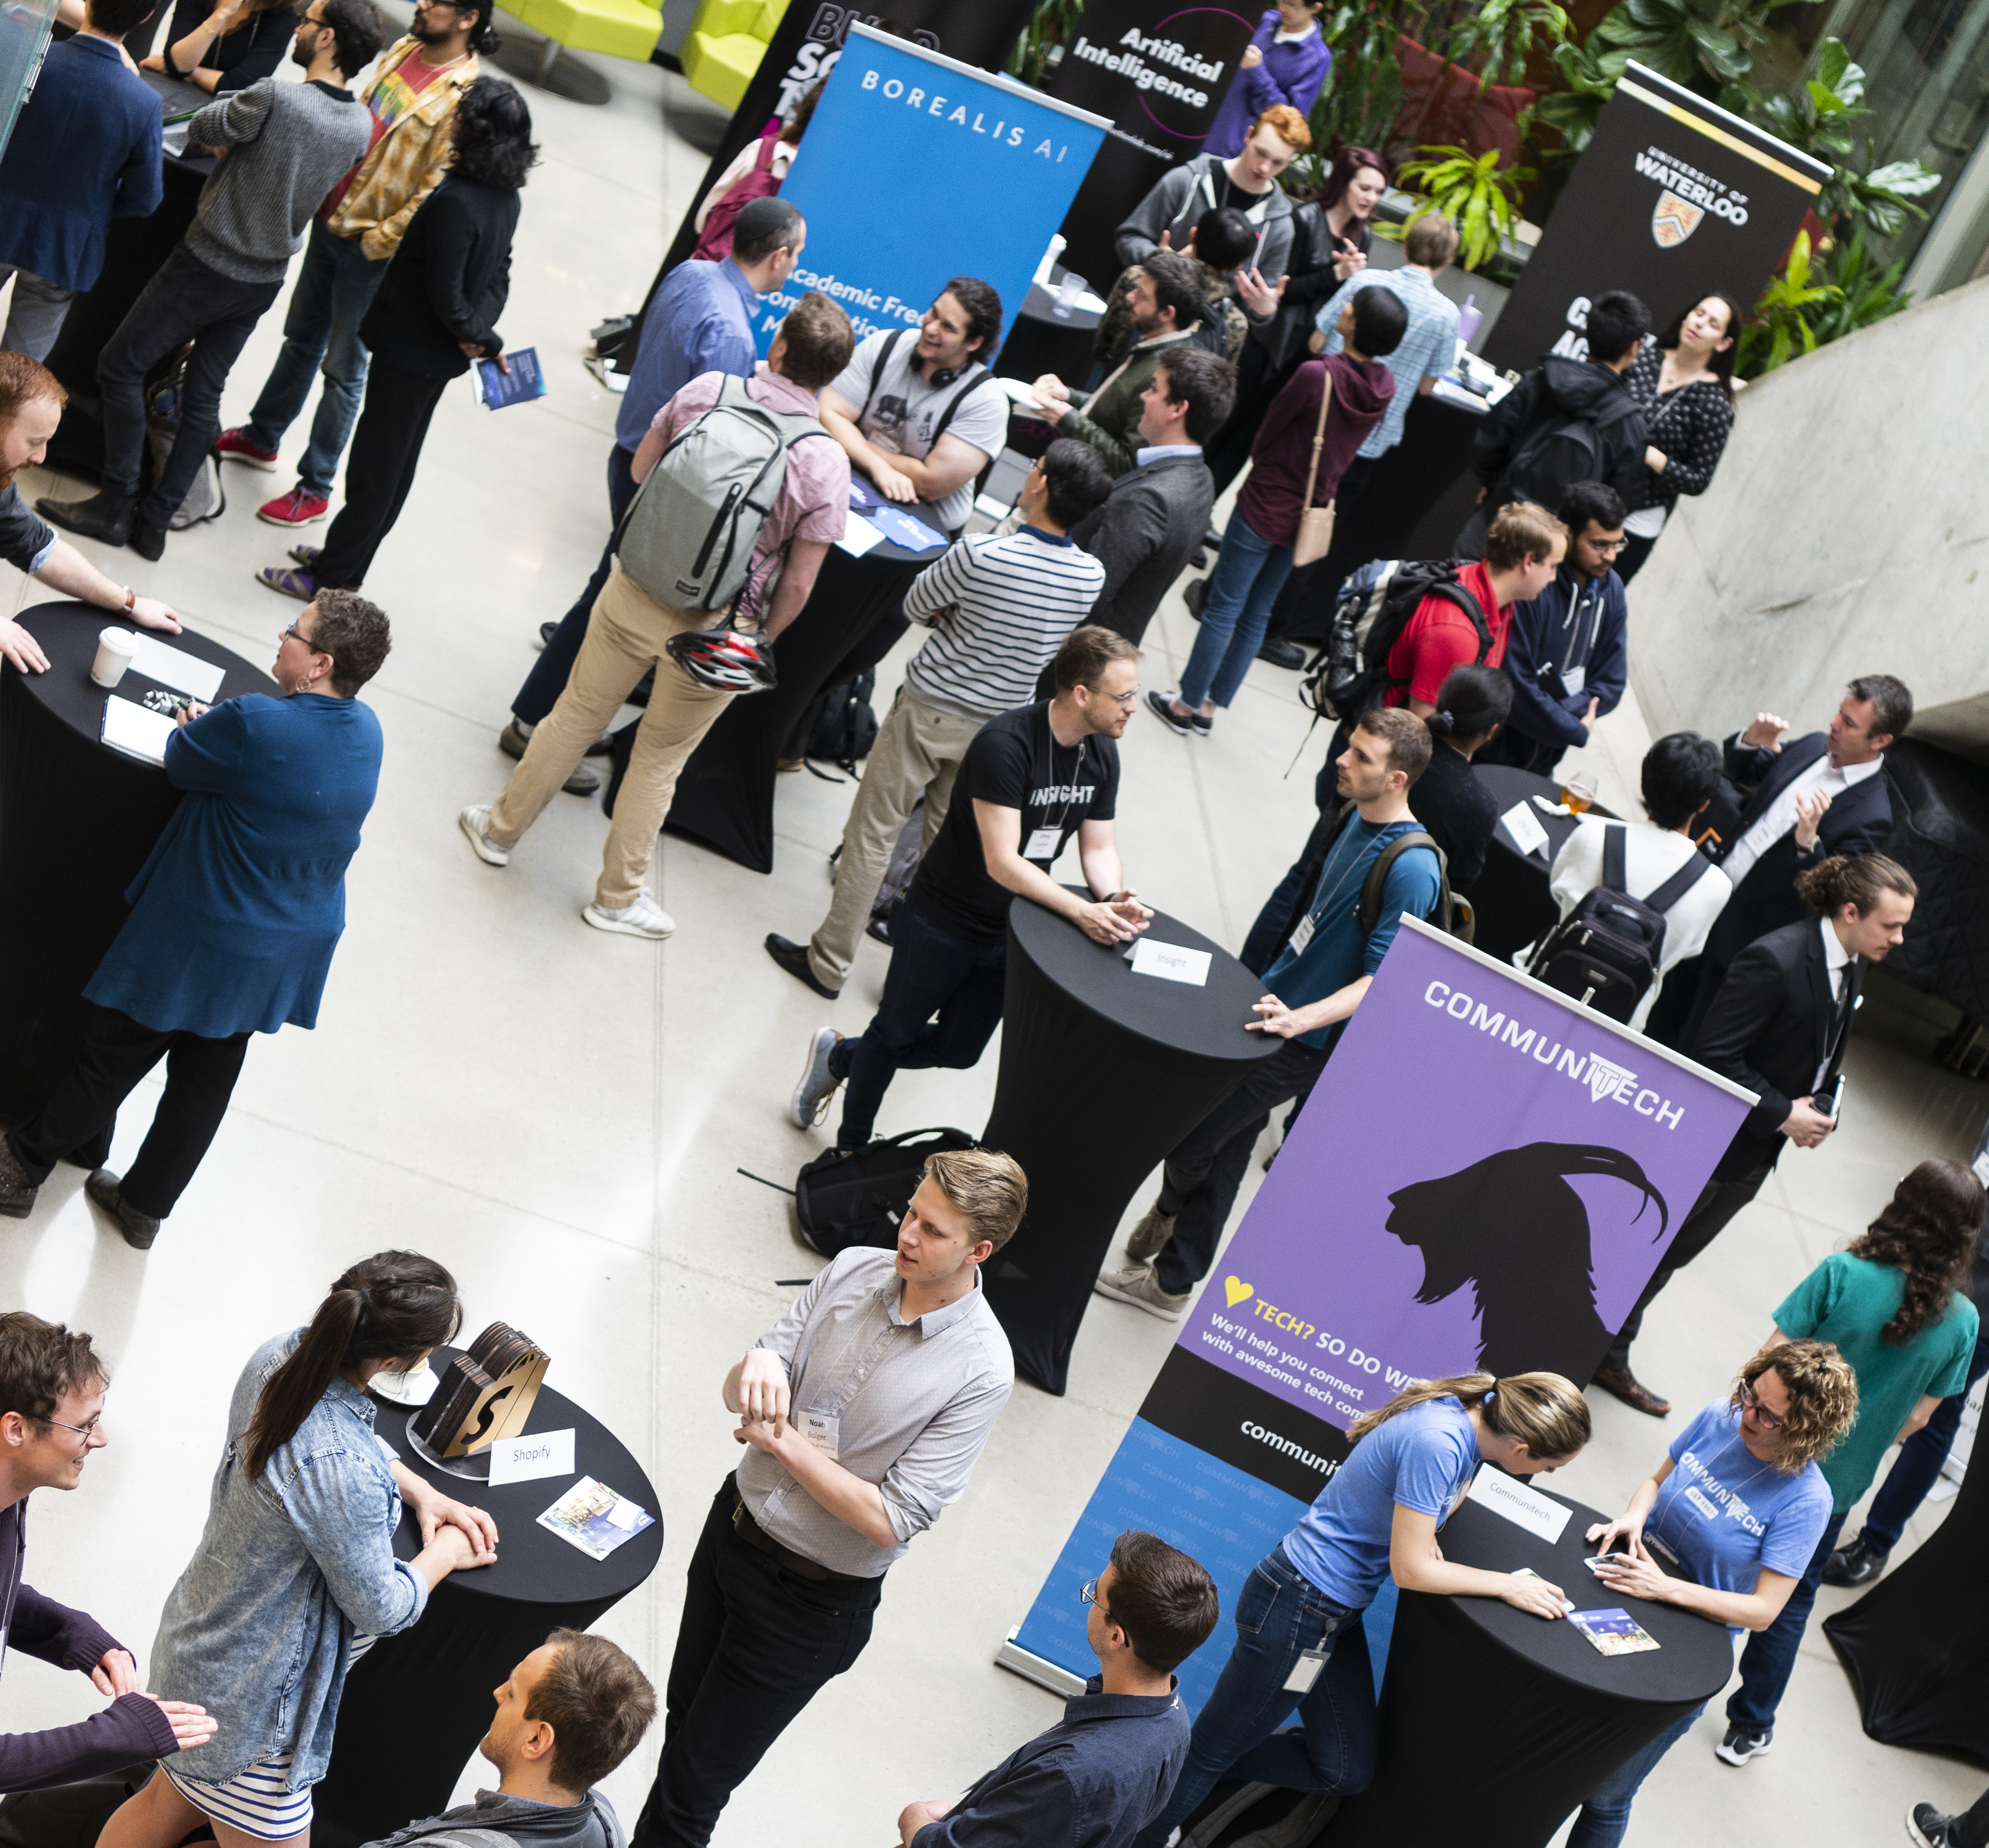 Aerial shot of people at a networking session in an atrium